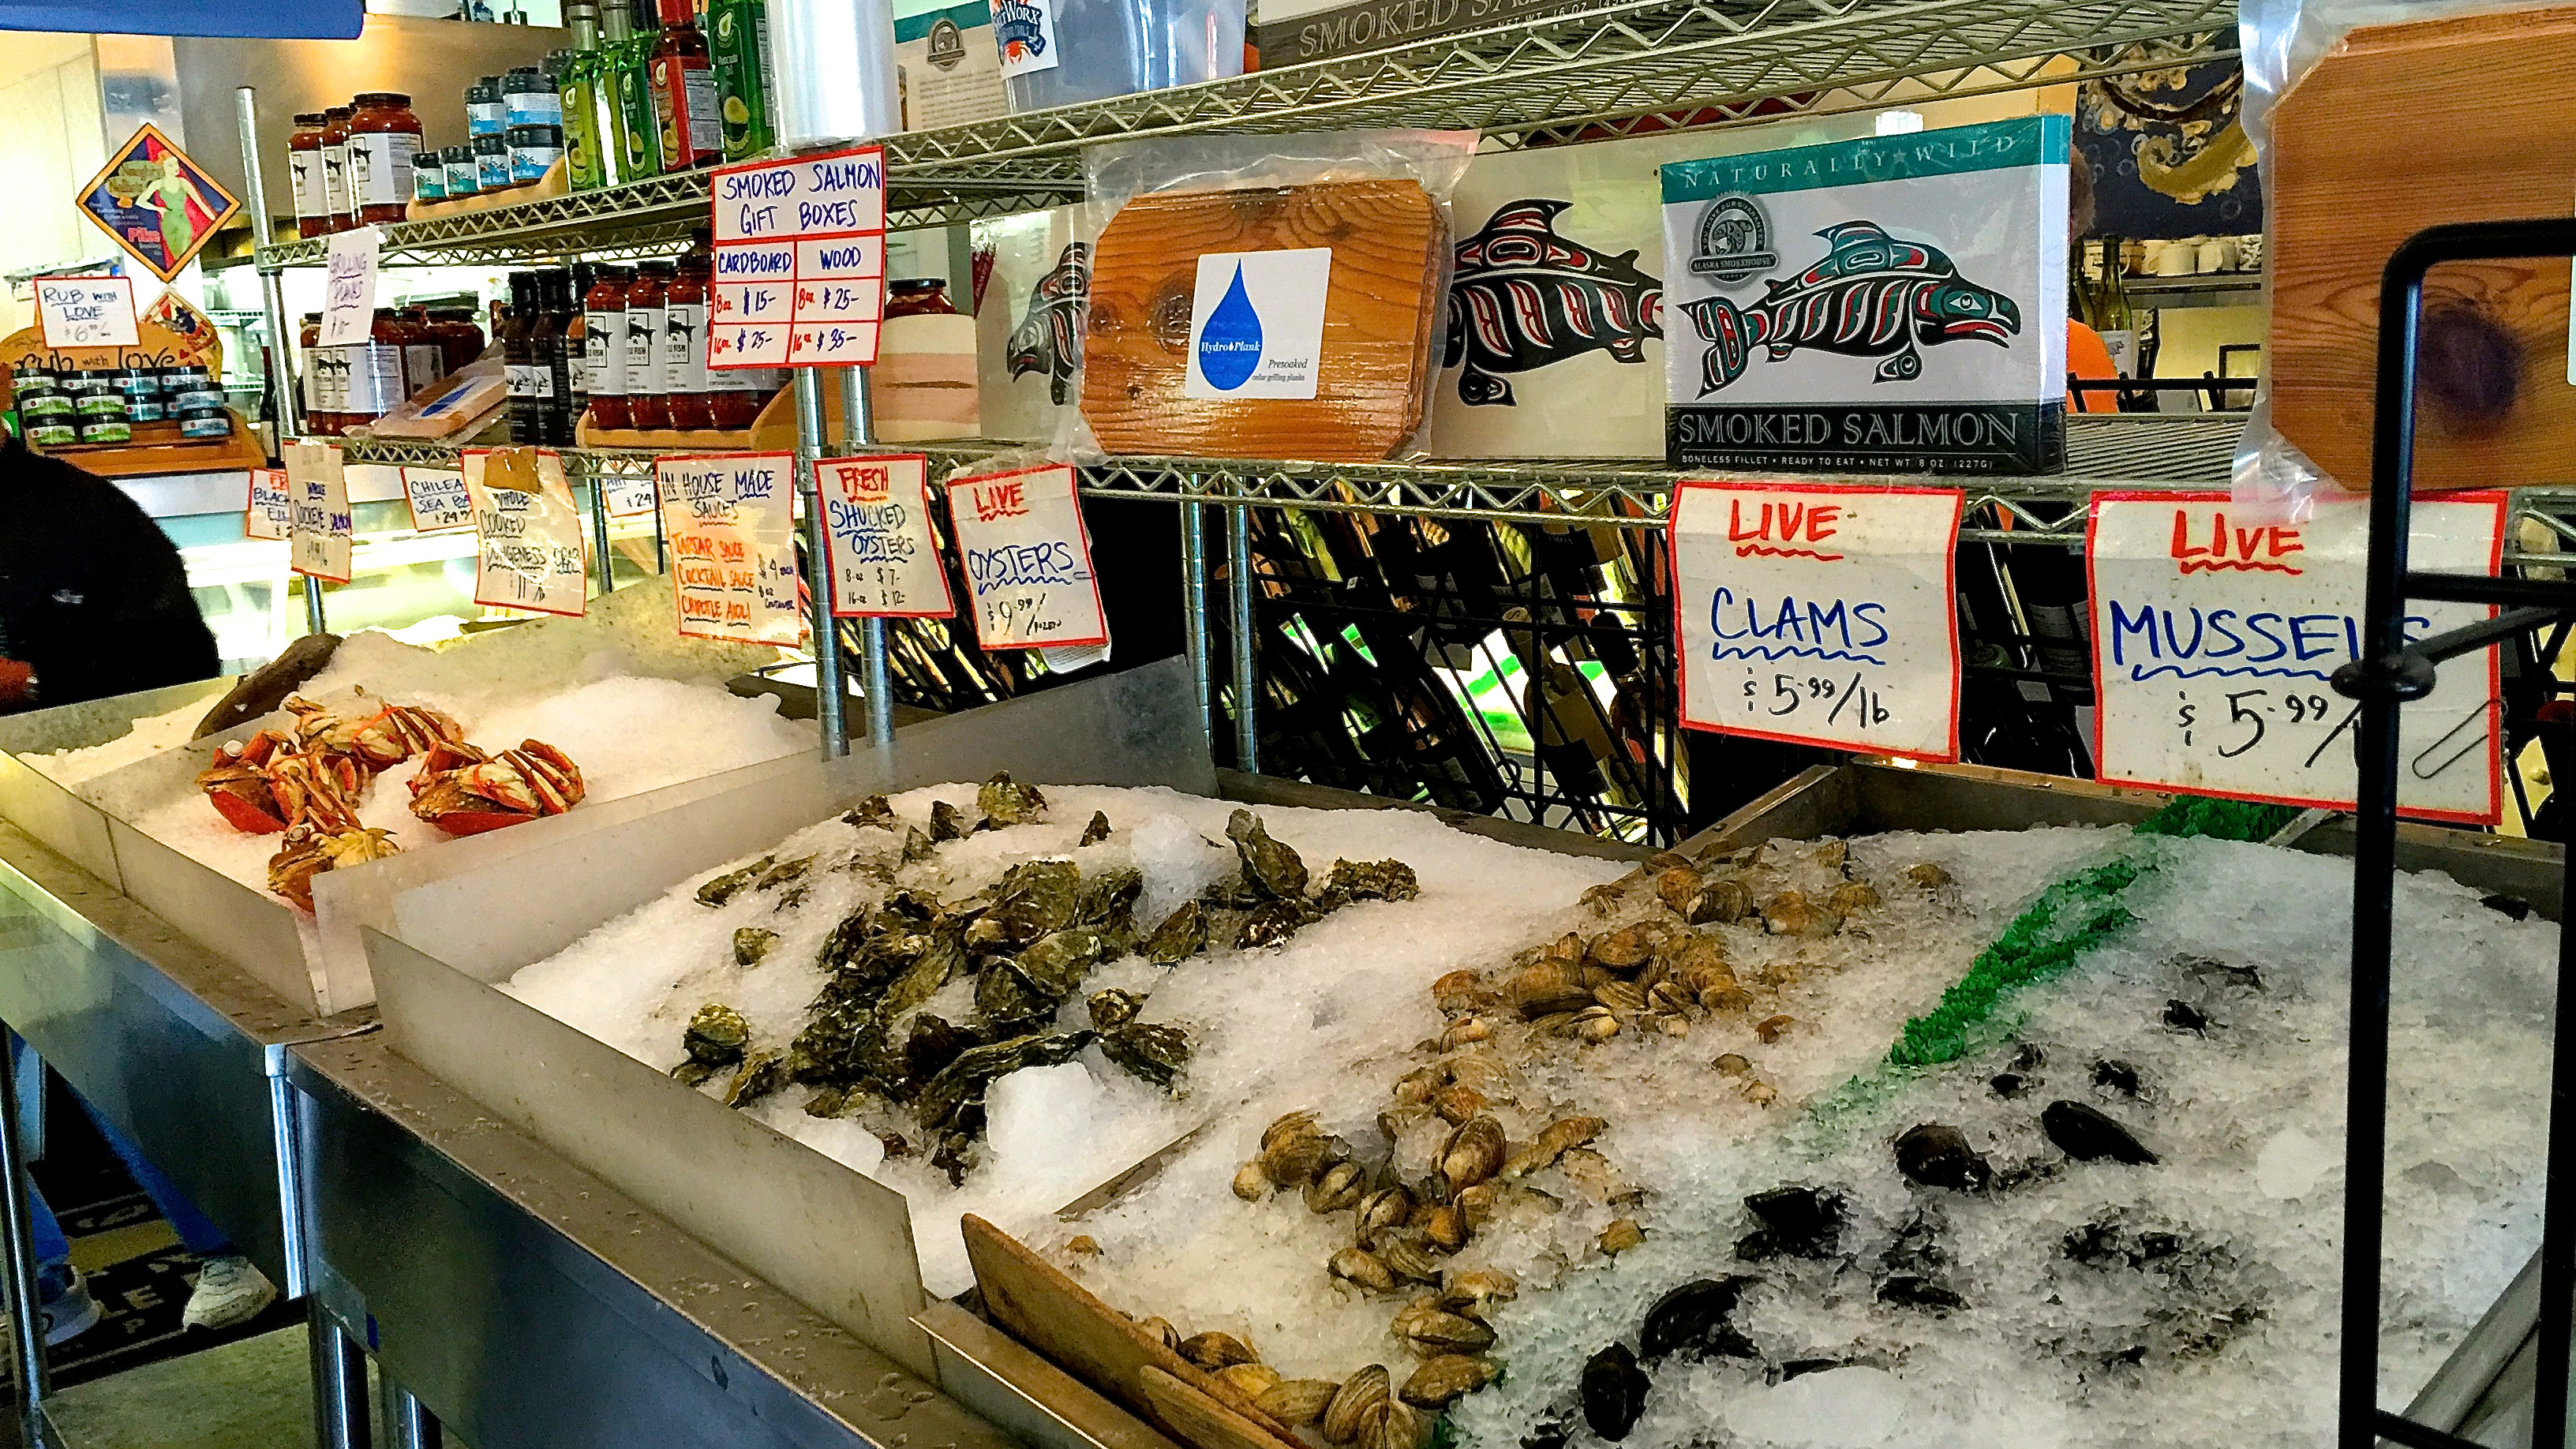 A fish market showcases fresh crab, oysters, clams, and mussels on beds of ice, along with boxes of Native American wild caught salmon on the shelves above.